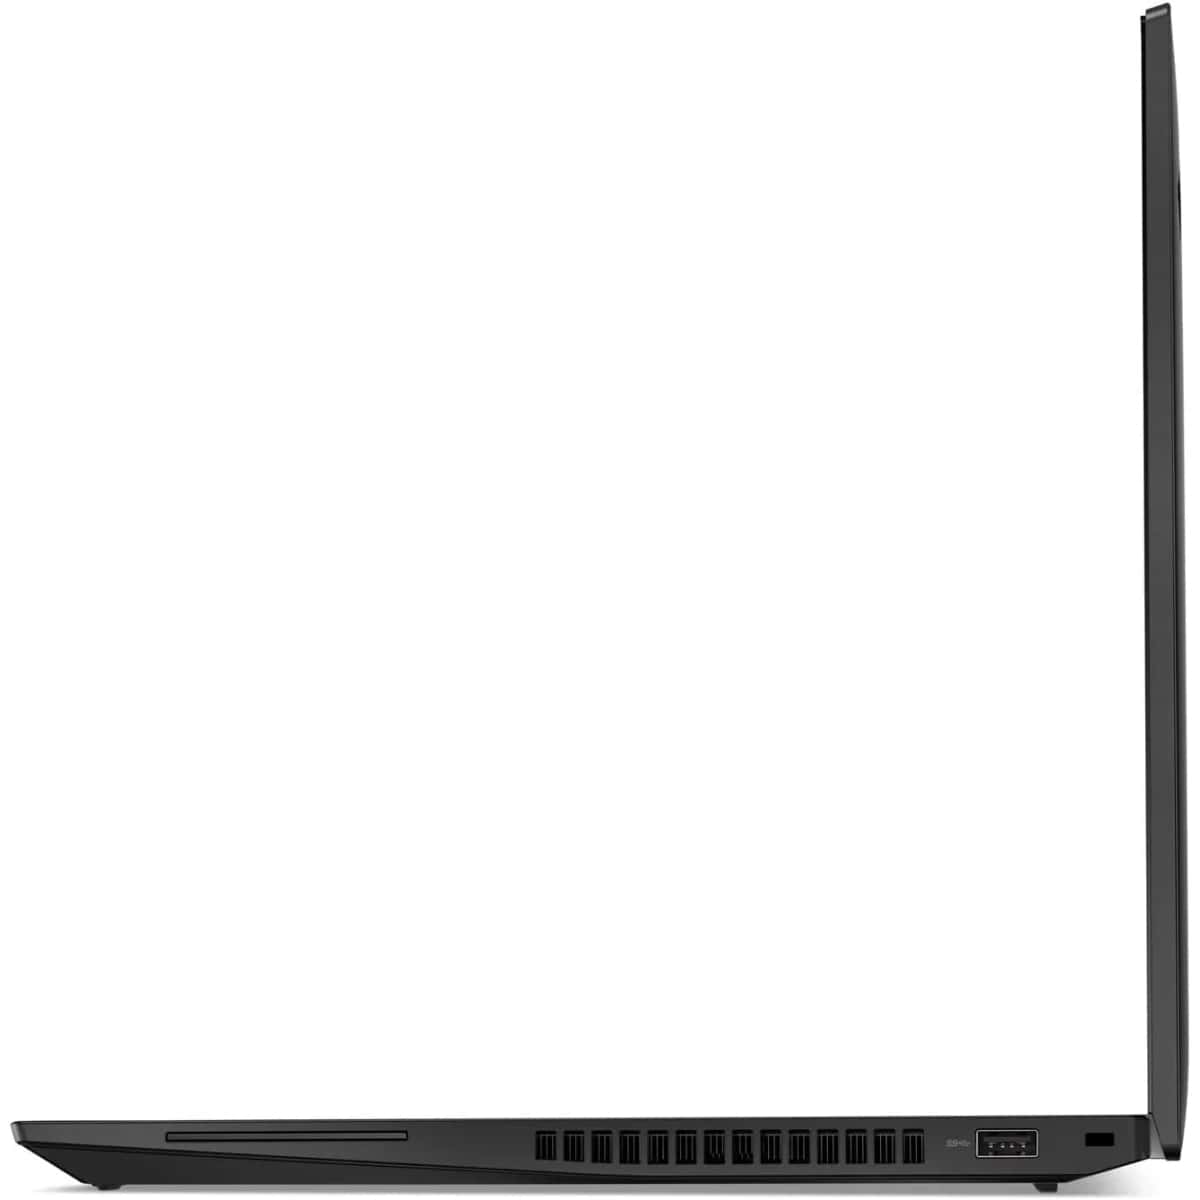 Lenovo NEW ThinkPad T16 Gen 1 Intel Core i7 up to 4.7GHz 18M Cash 12-Cores